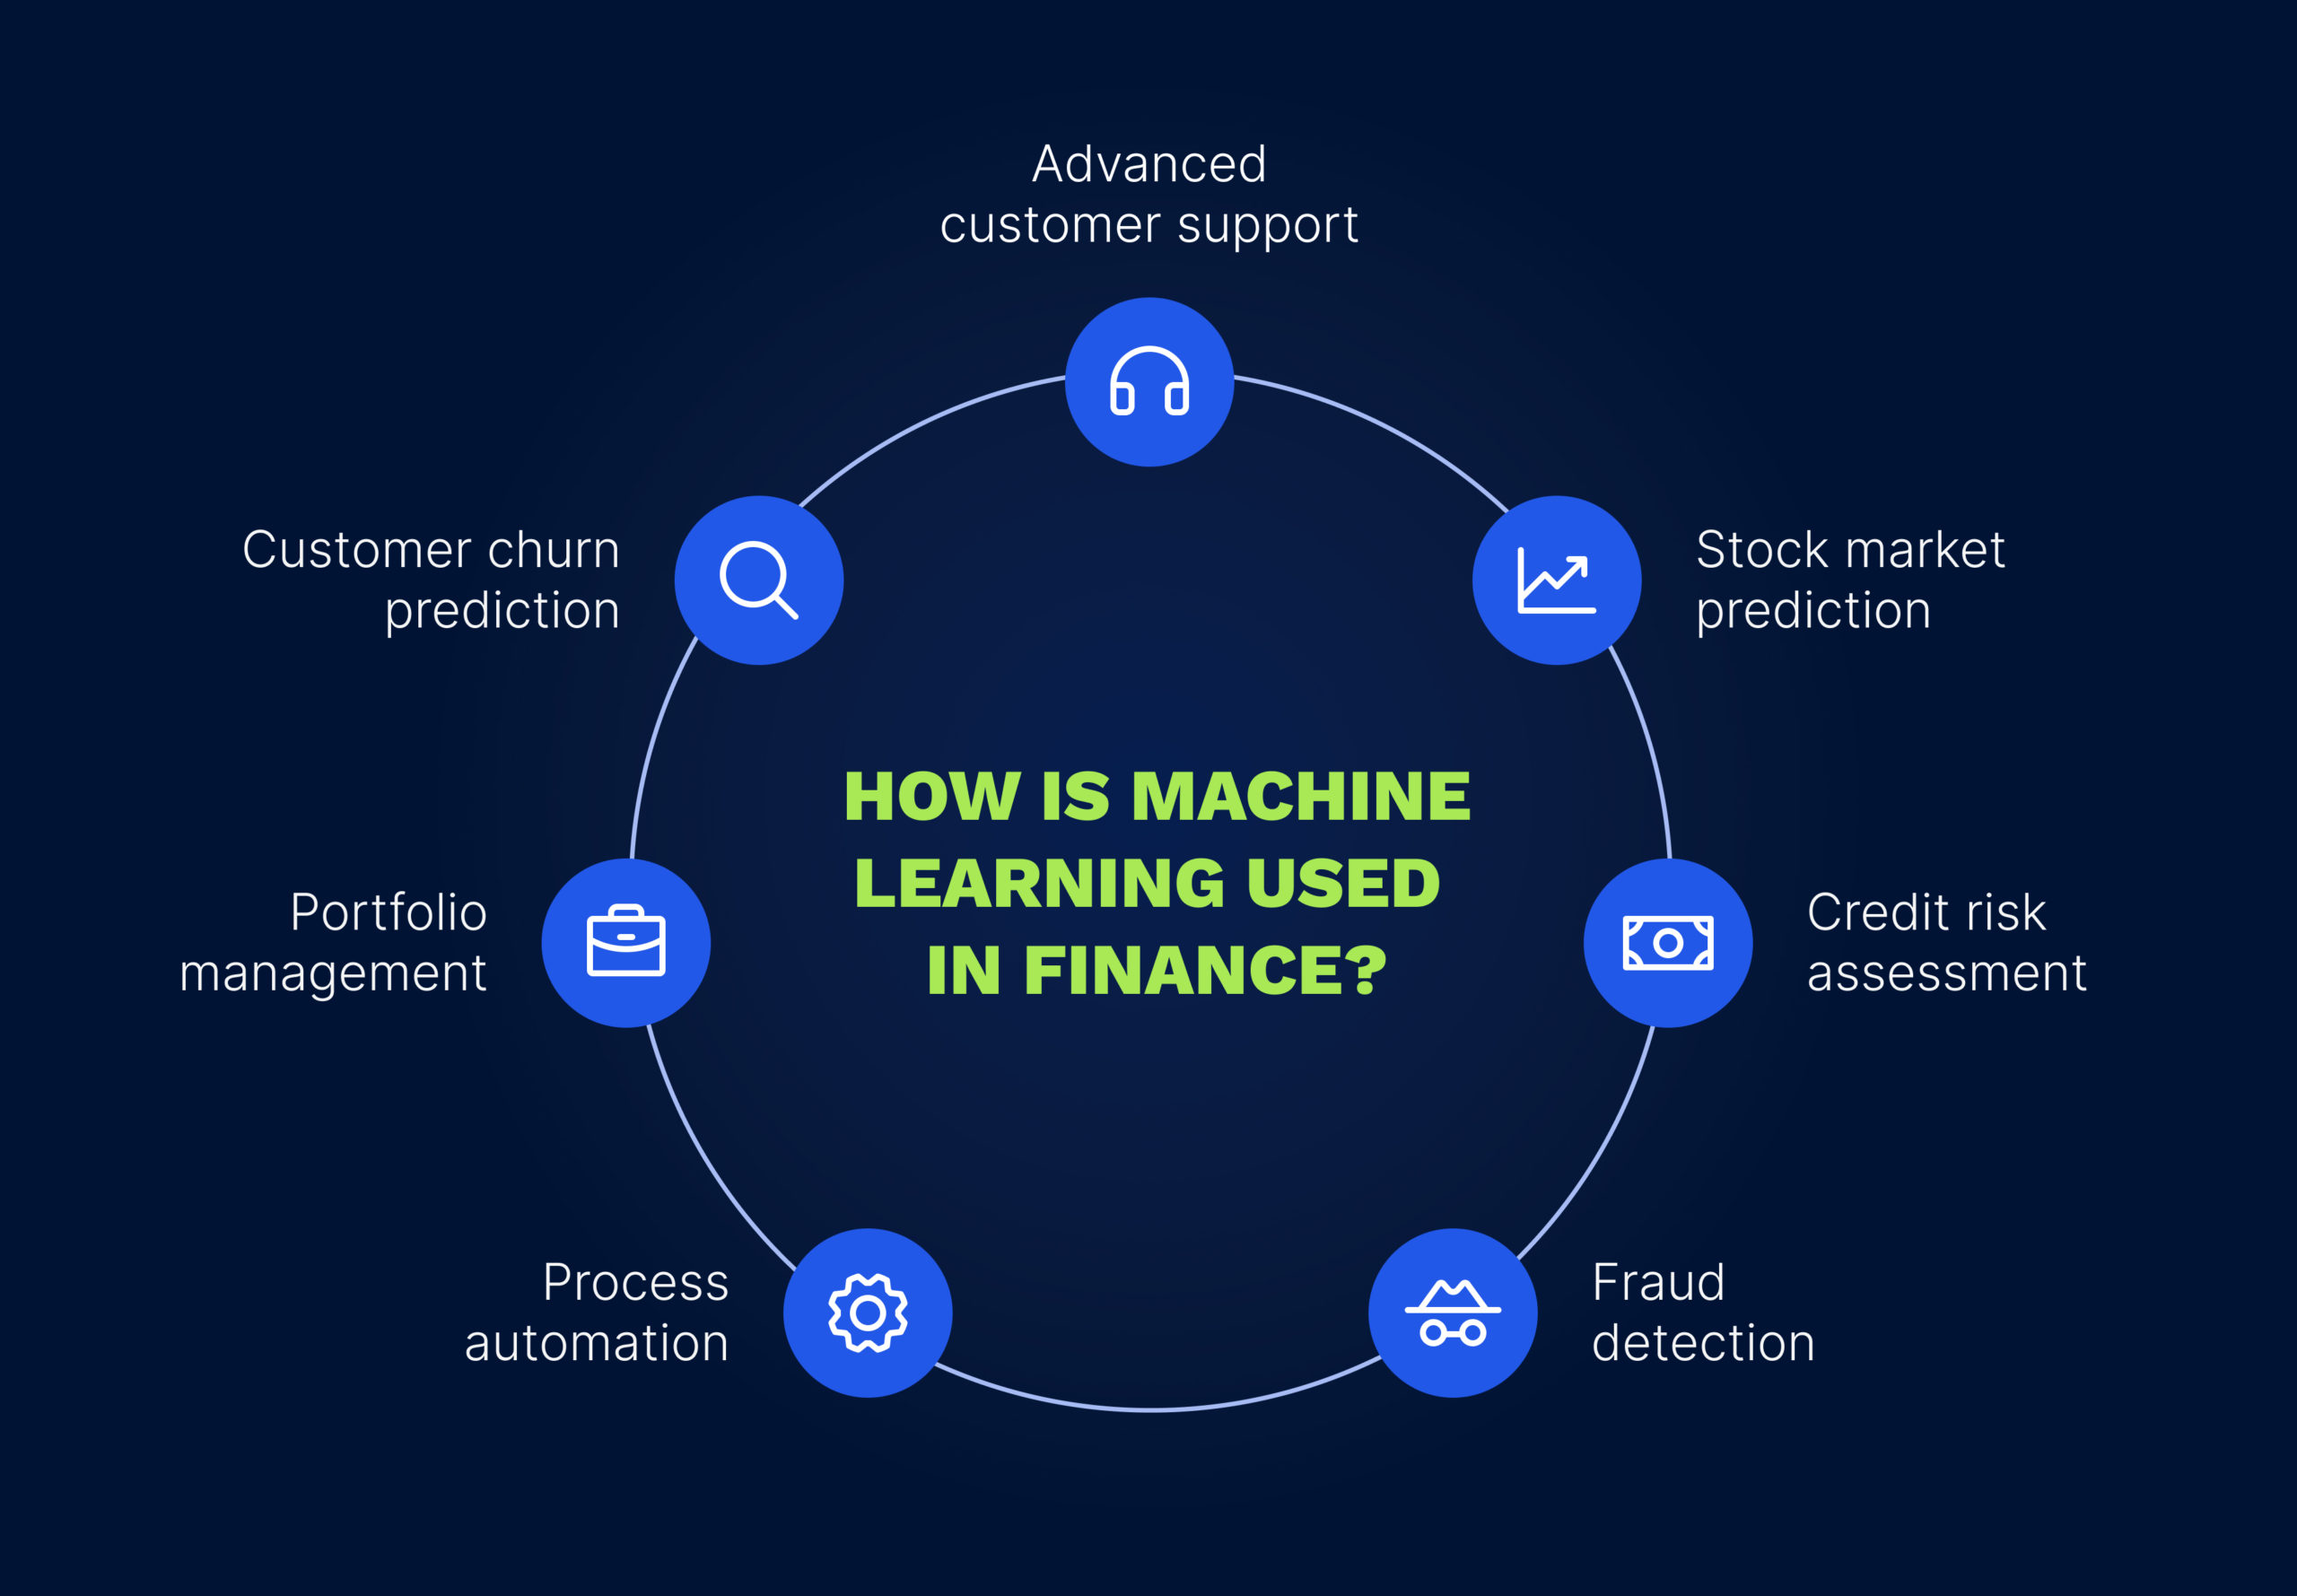 Top use cases of machine learning in financial services